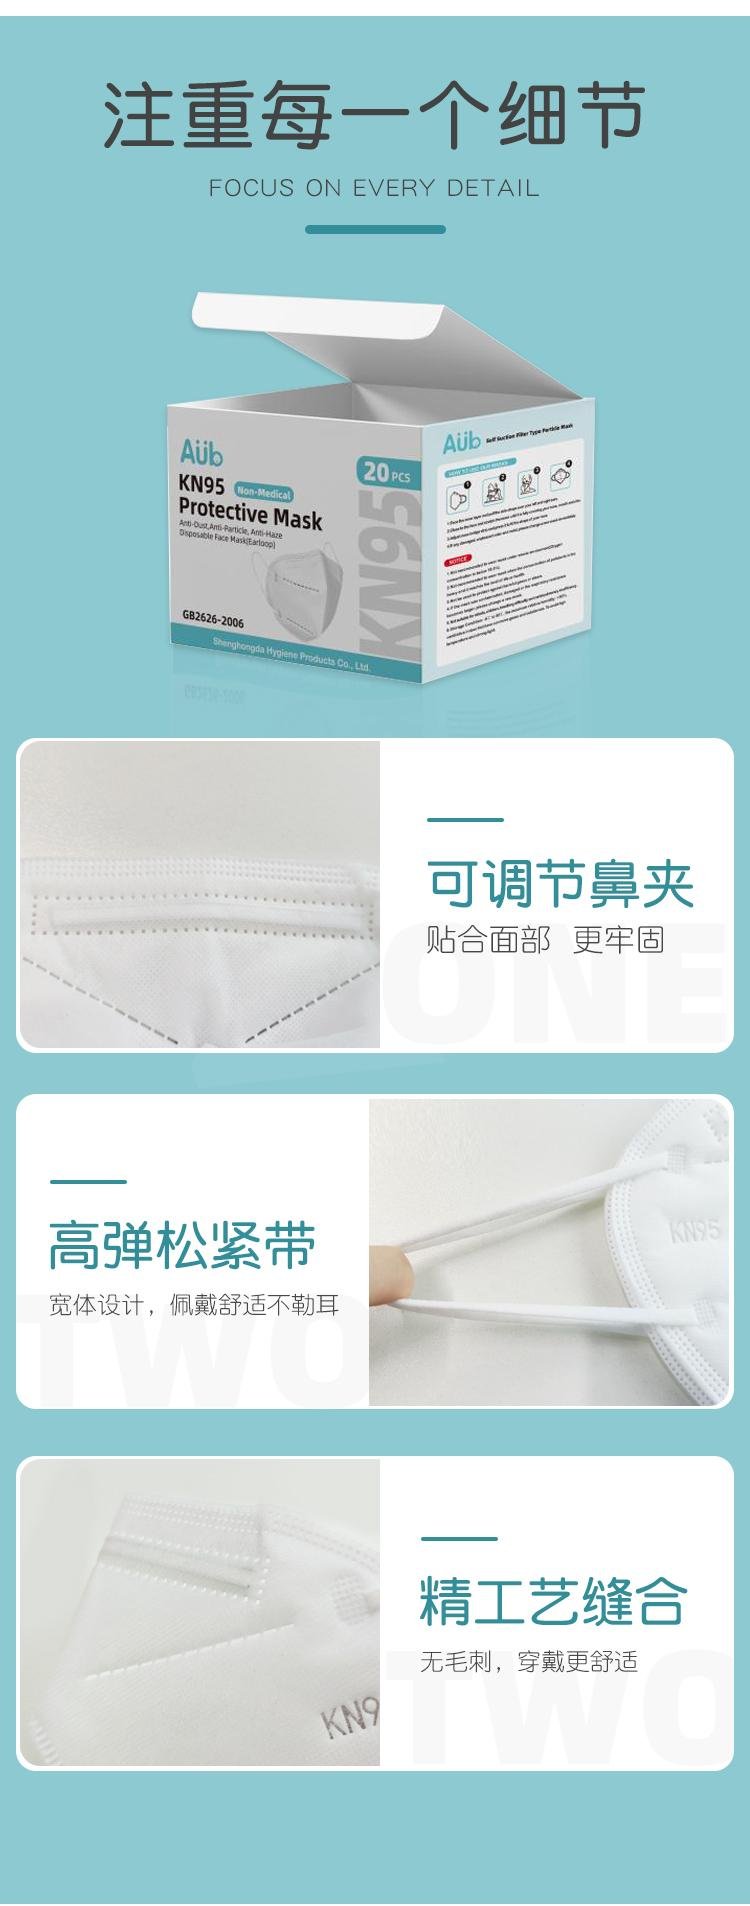 KN95 disposable protective masks 4